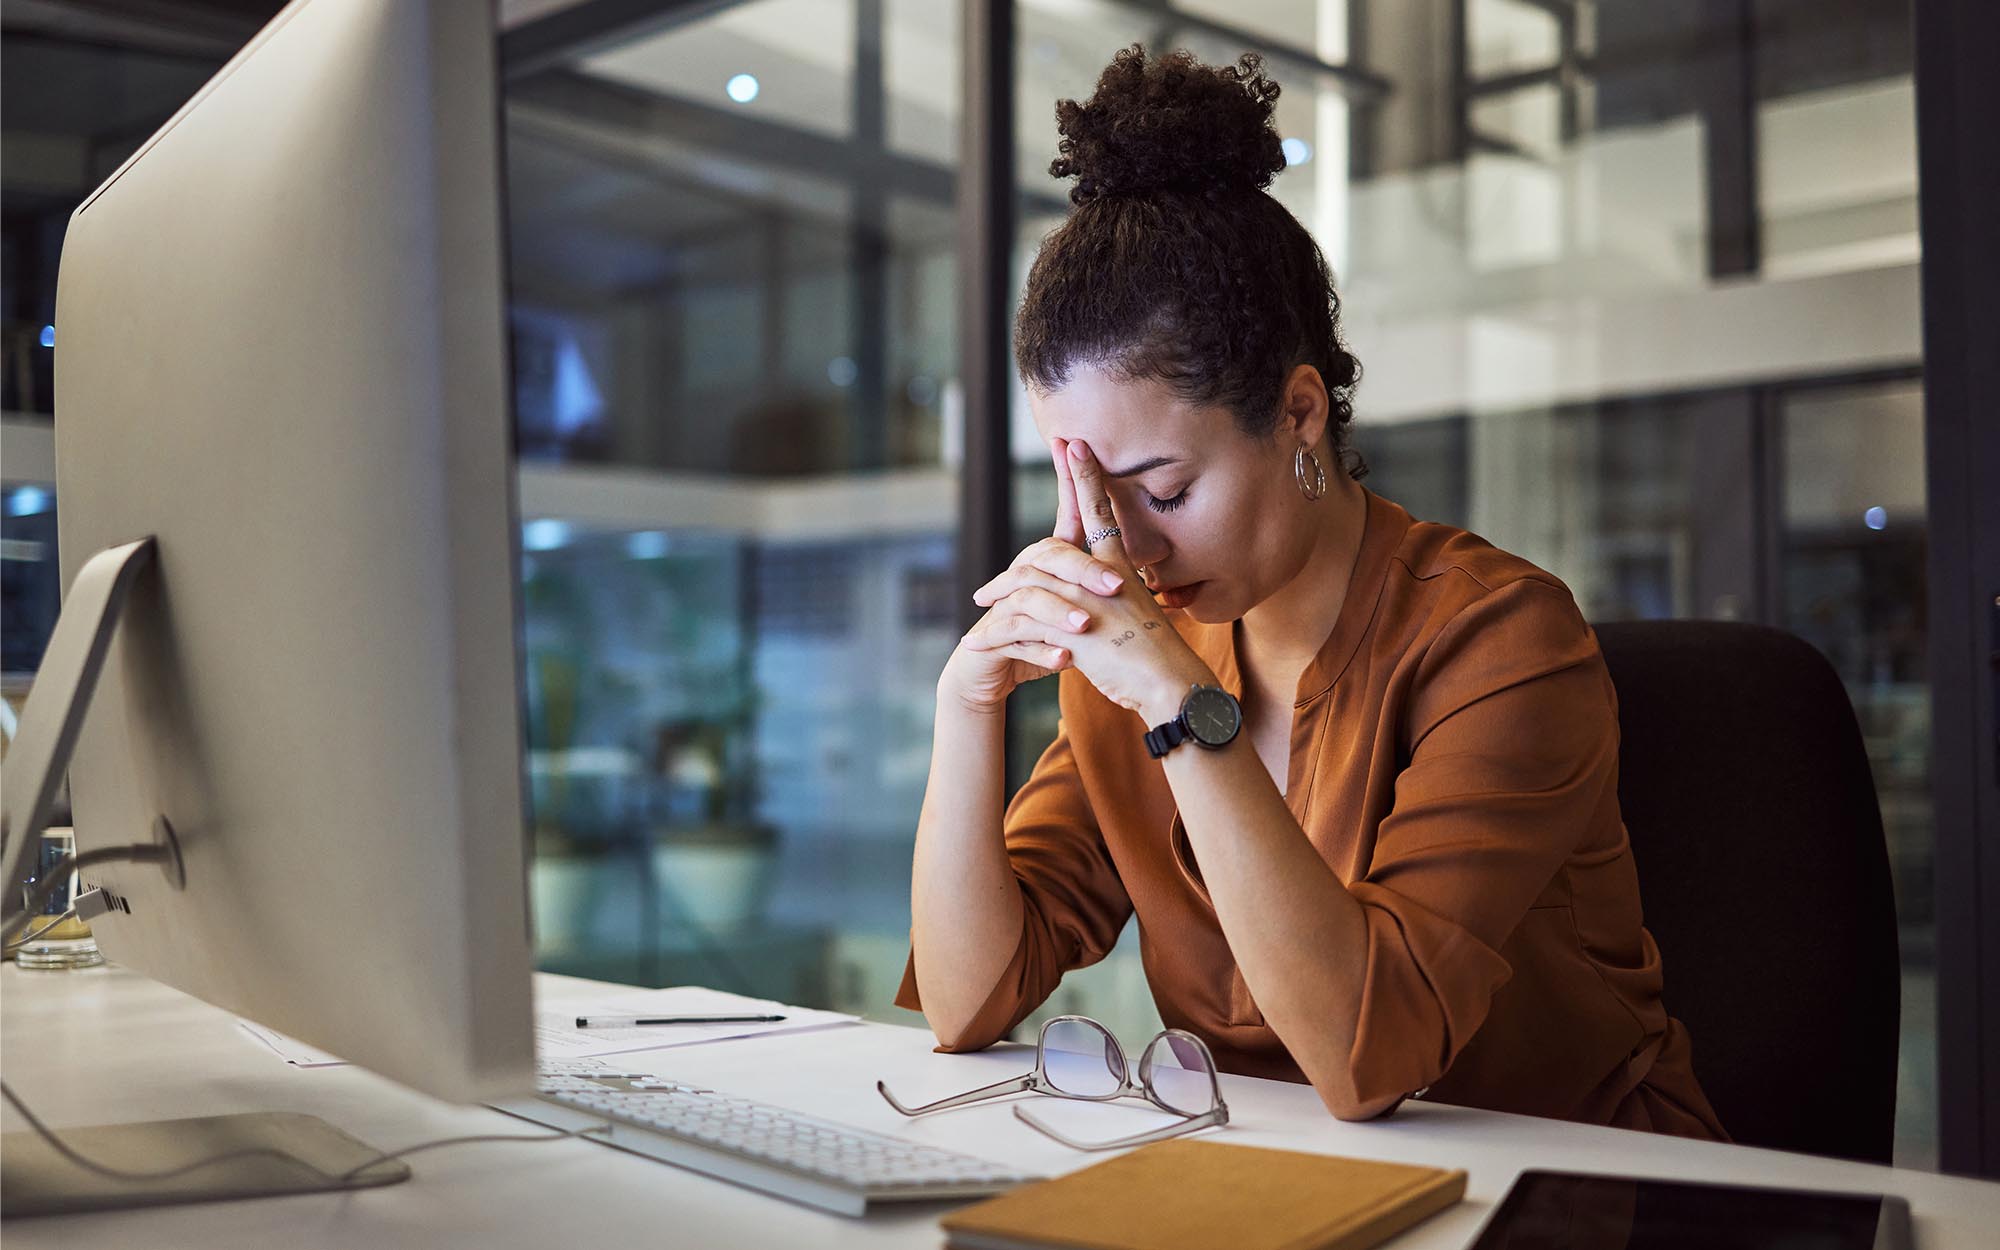 Image of a stressed out person sitting at their computer desk.